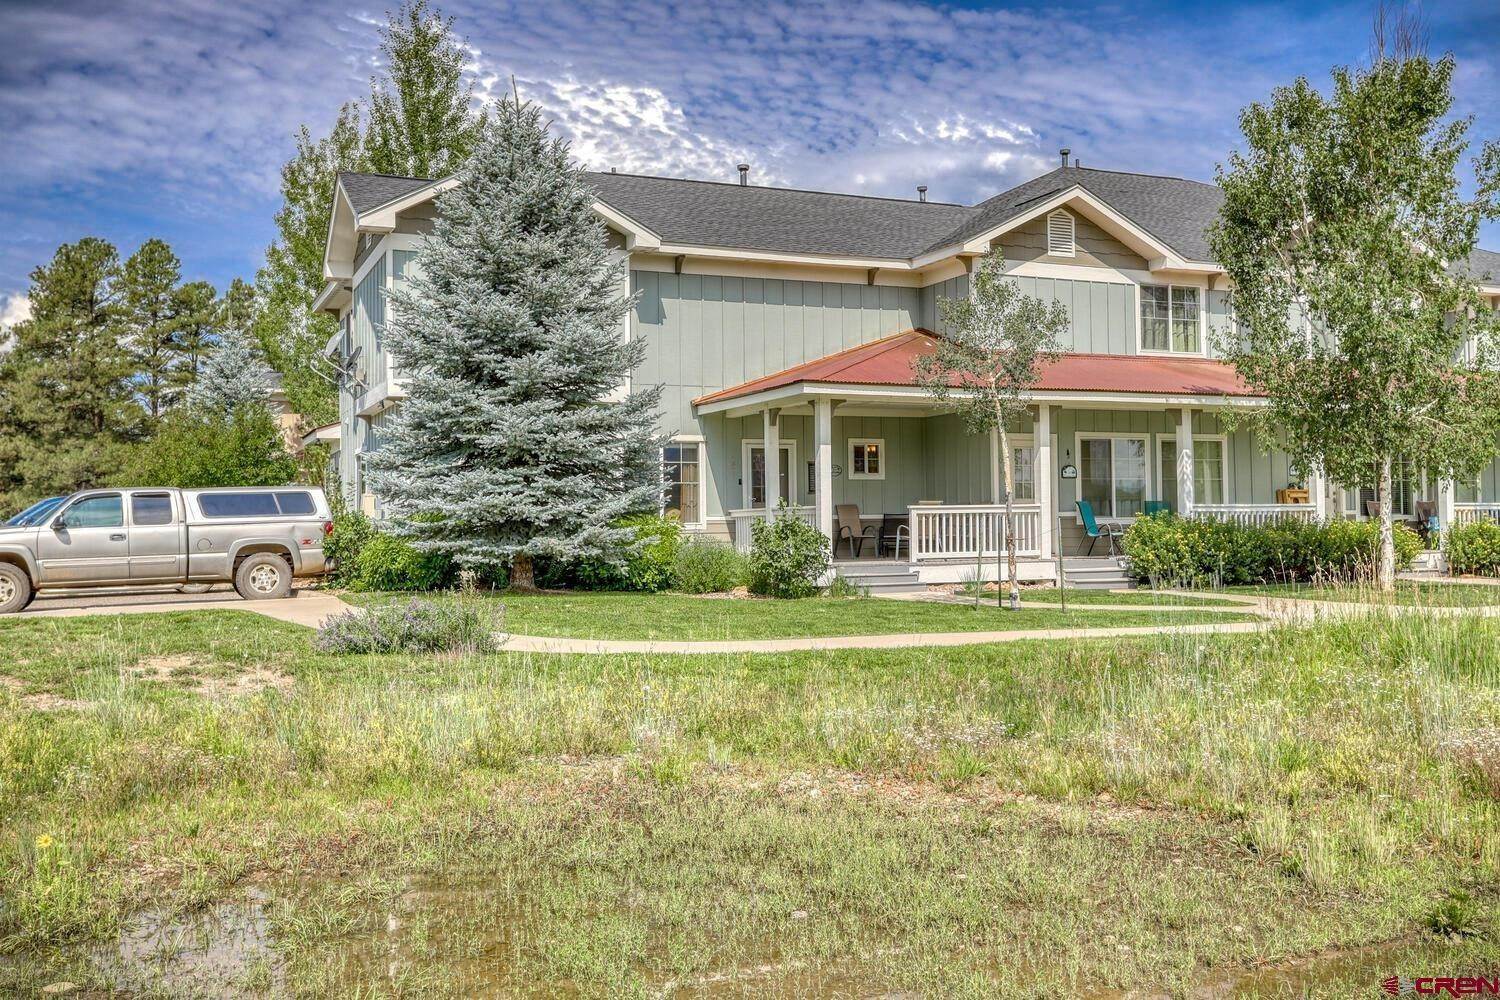 Condominiums for Active at 20 Timberline Drive J-6 Pagosa Springs, Colorado 81147 United States